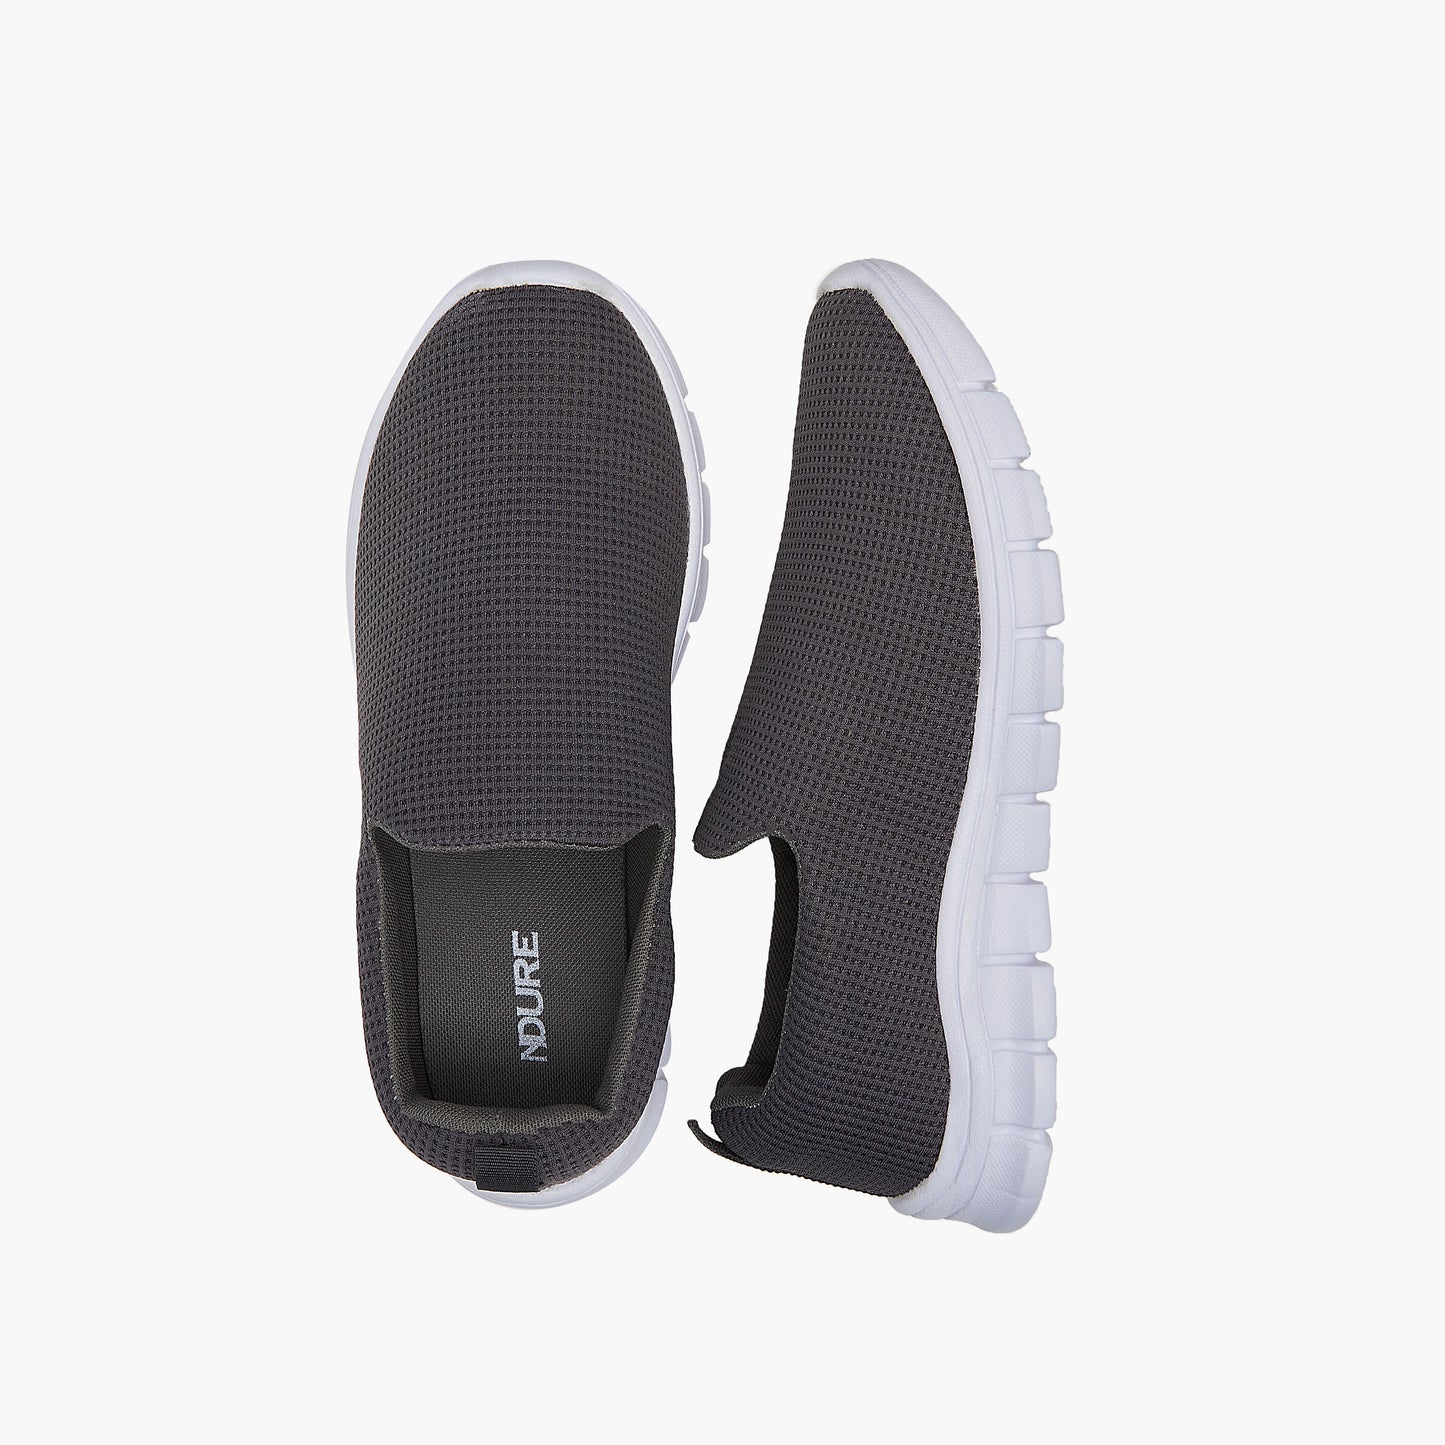 Slip on shoes price in Pakistan